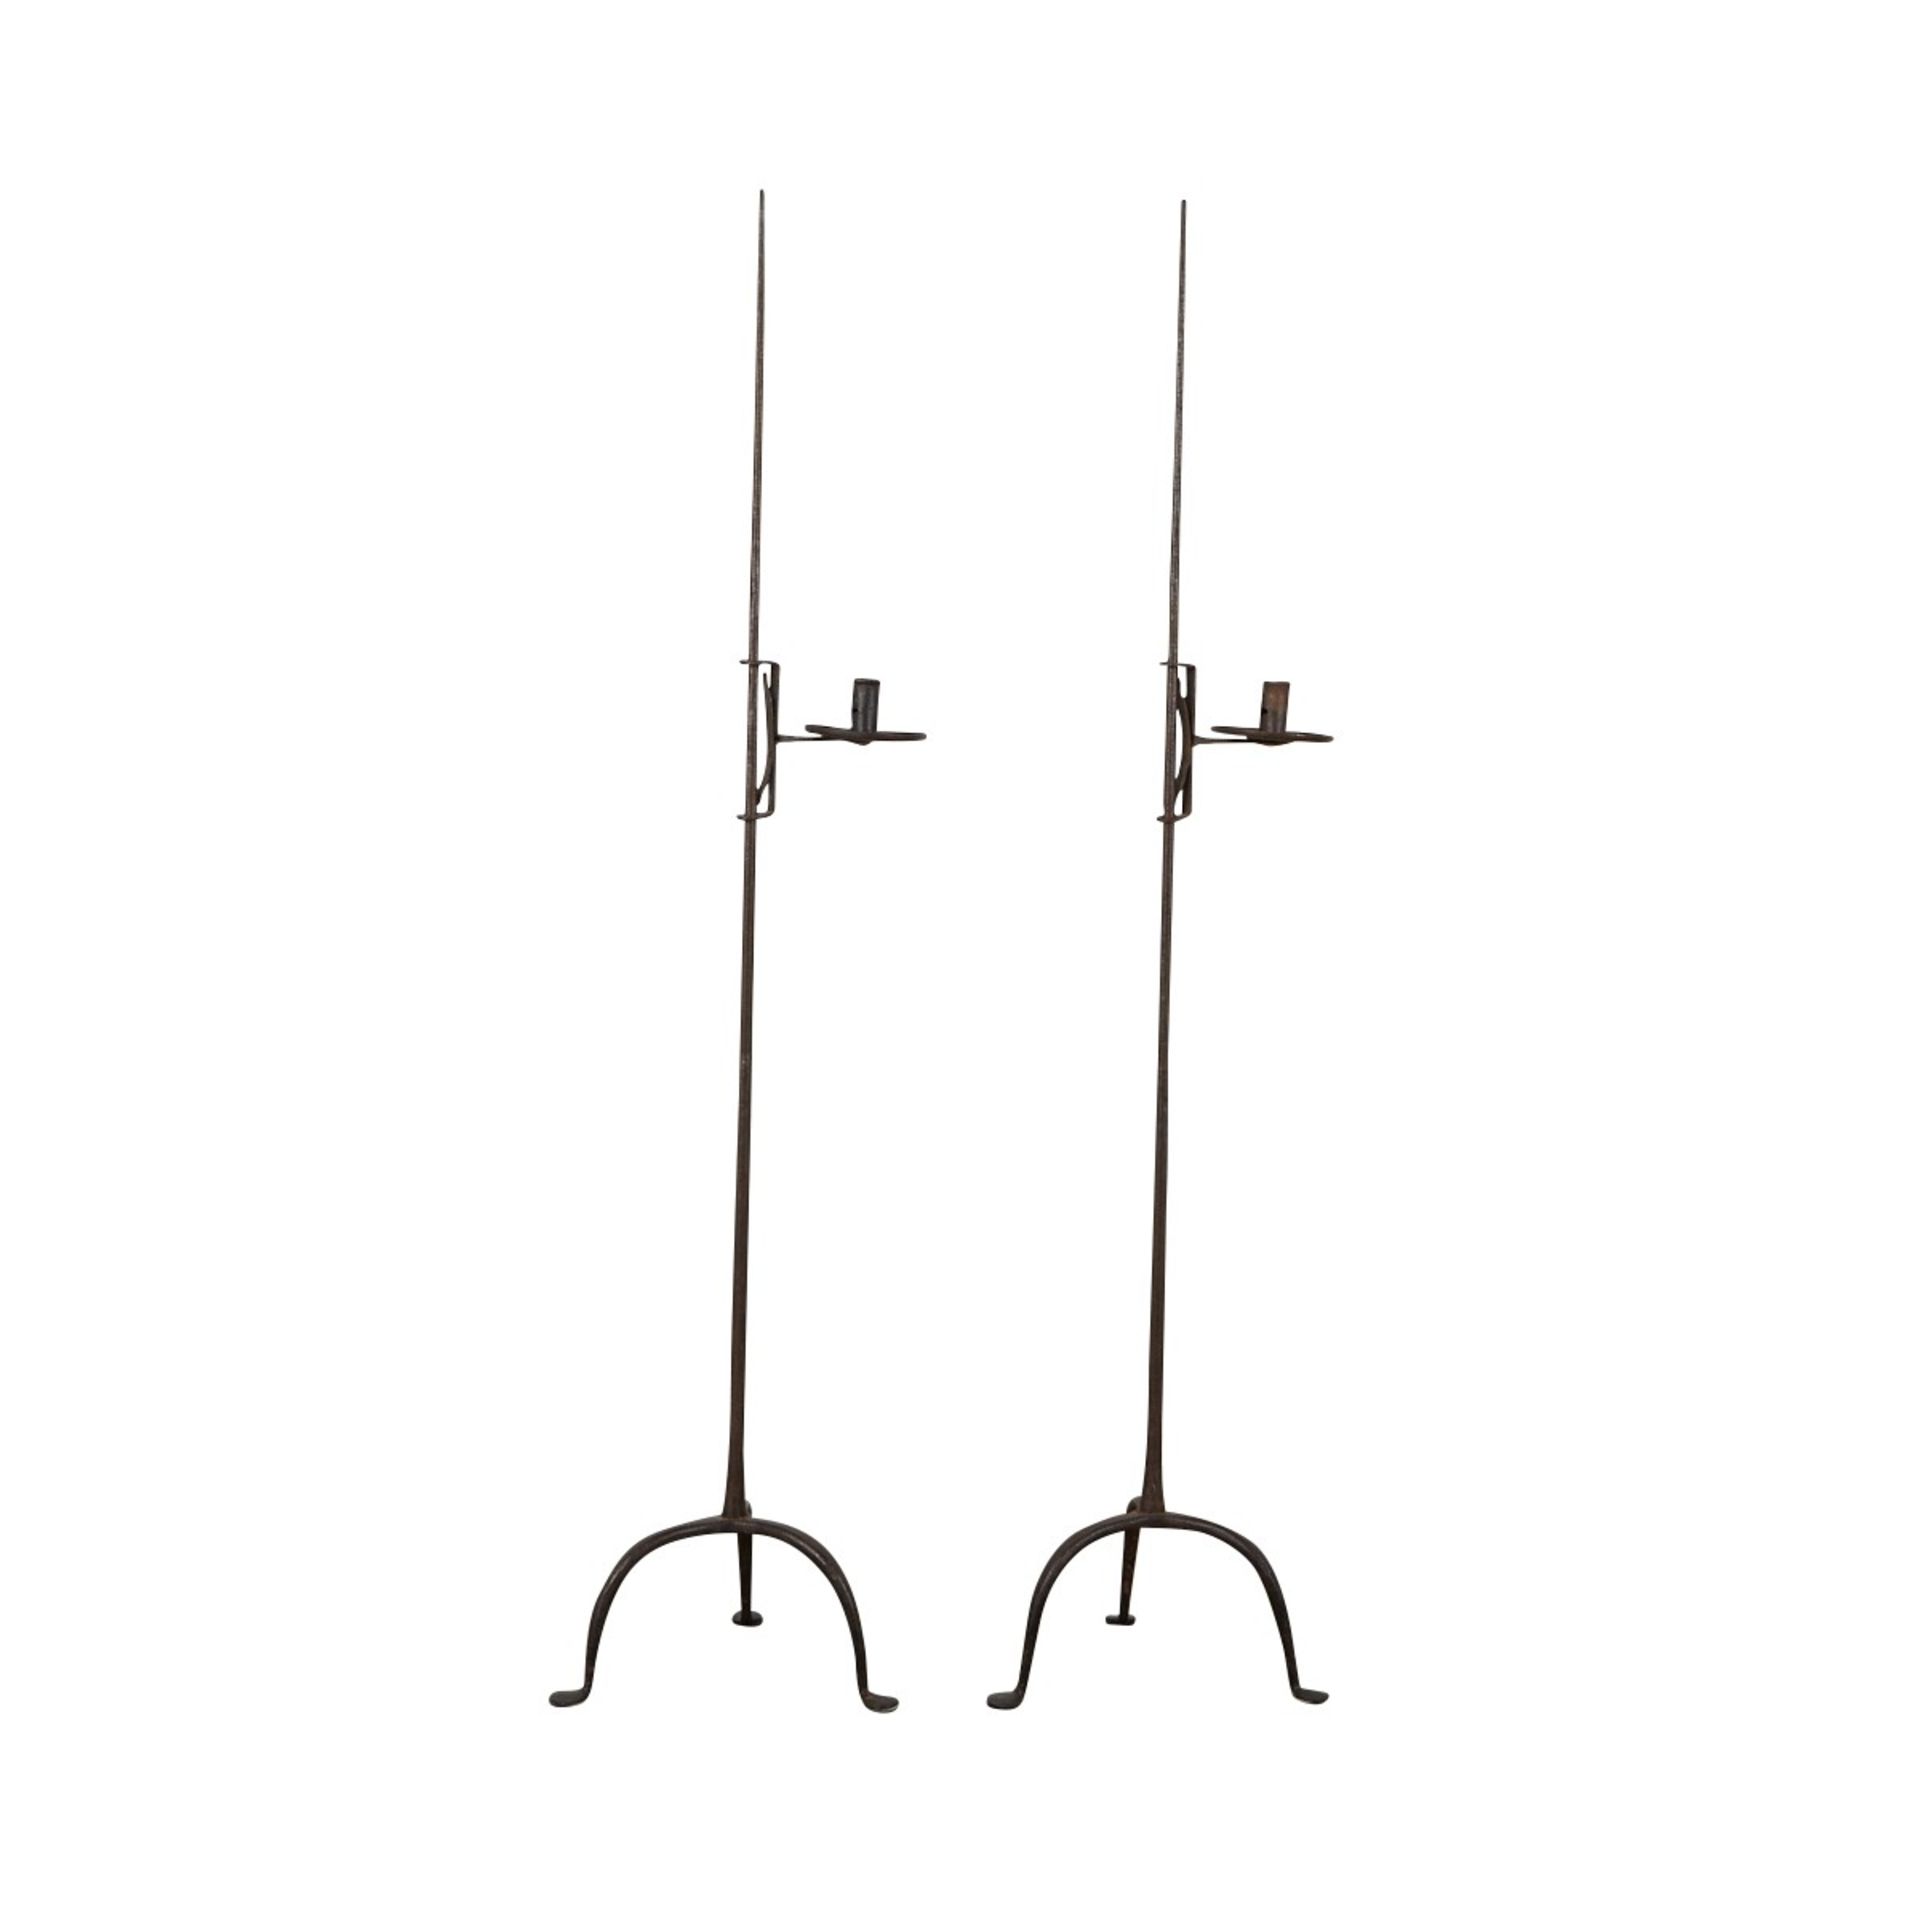 Pair of Wrought Iron Candle Stands - Image 4 of 7